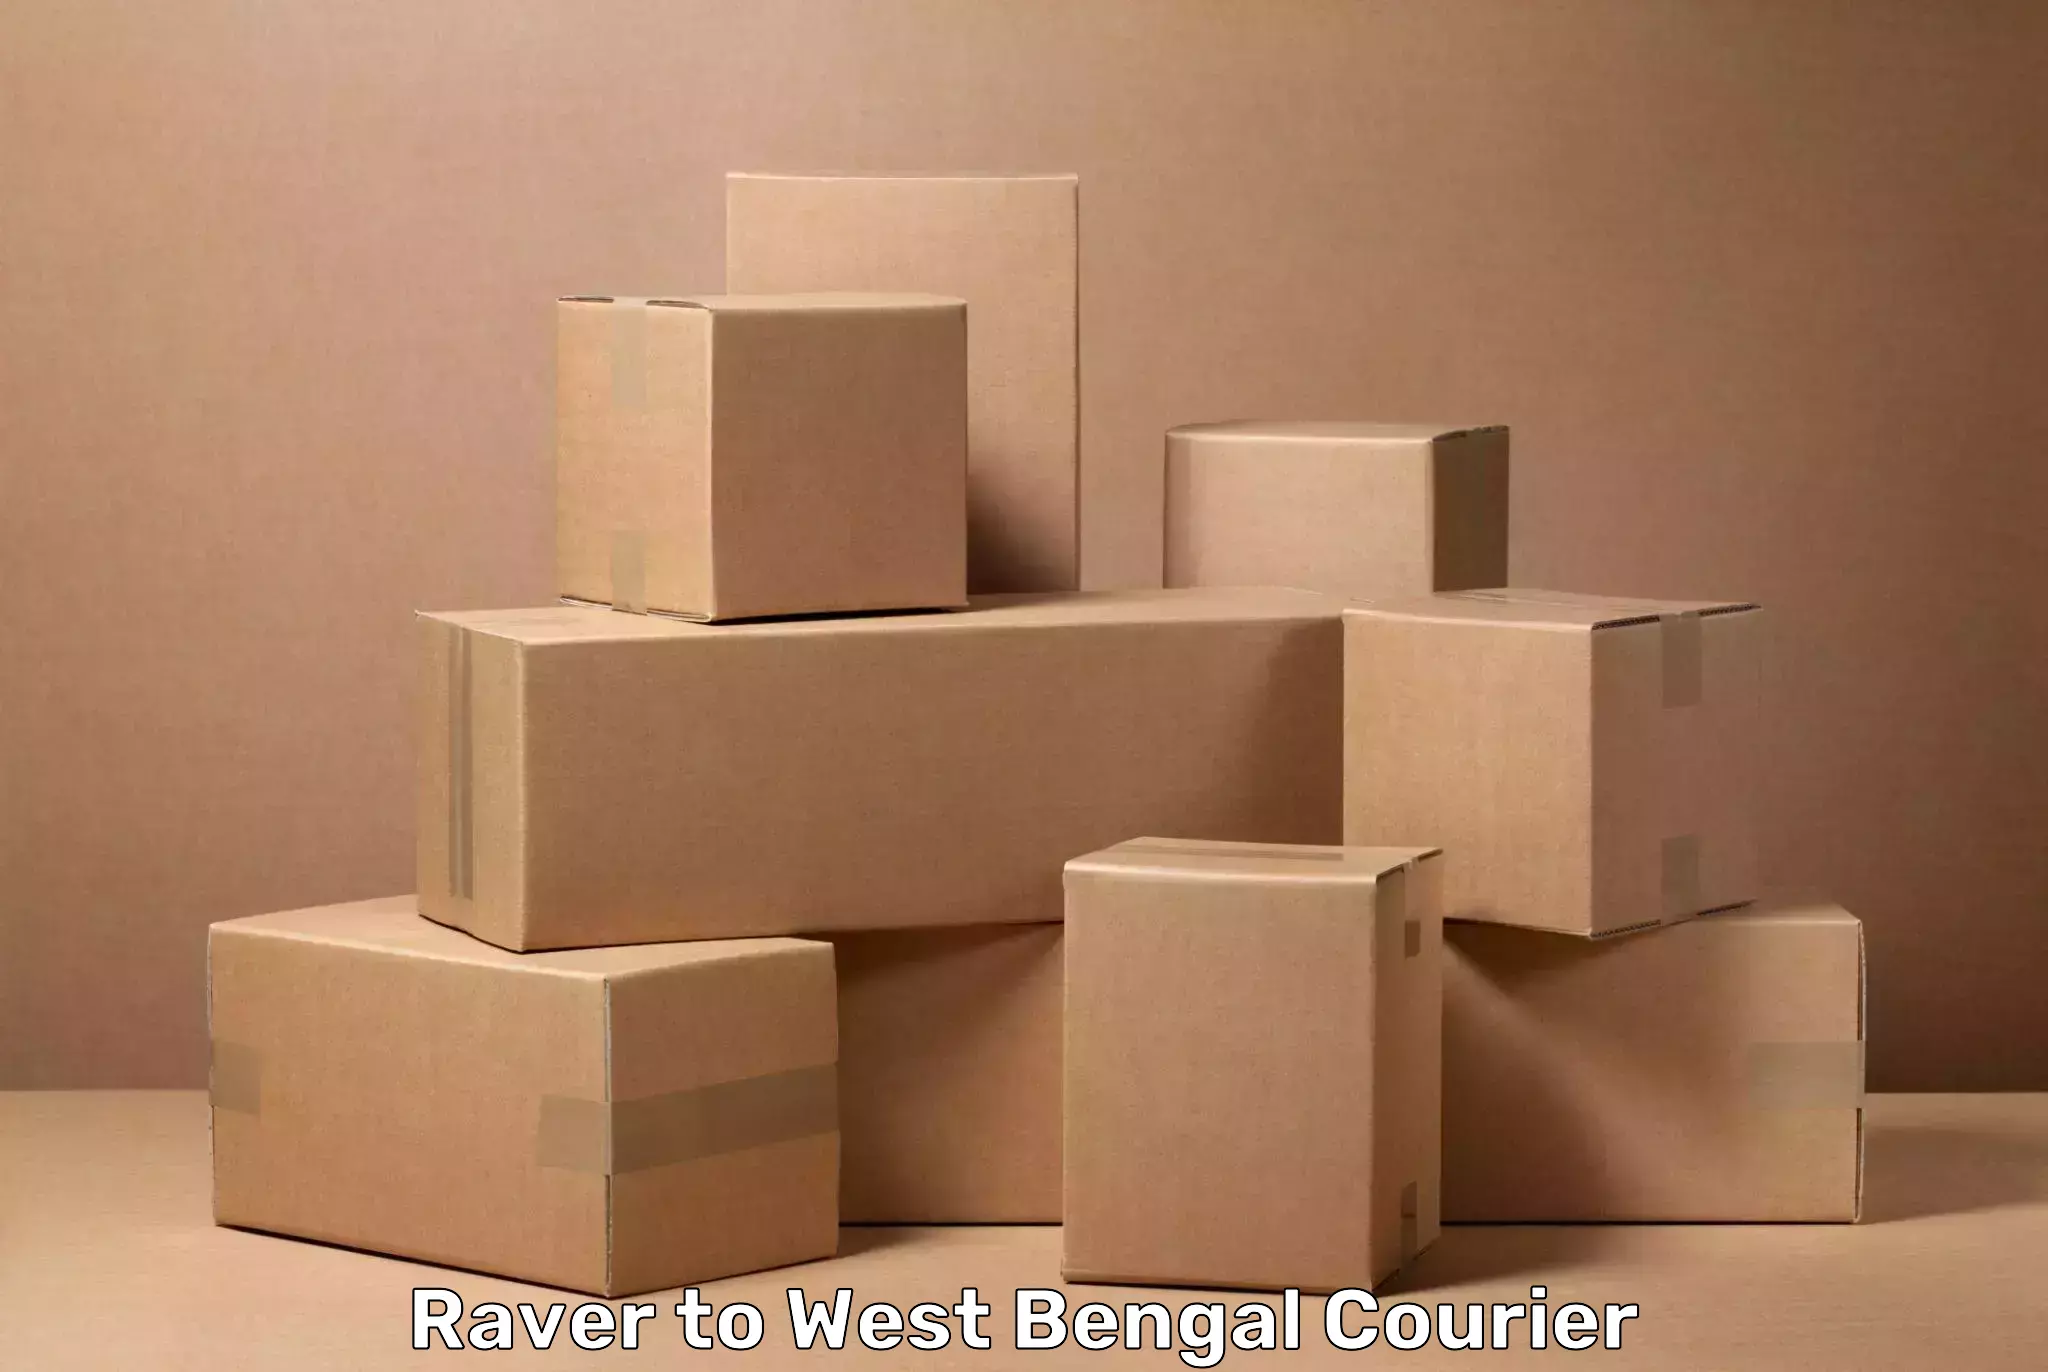 Luggage transport consulting Raver to West Bengal